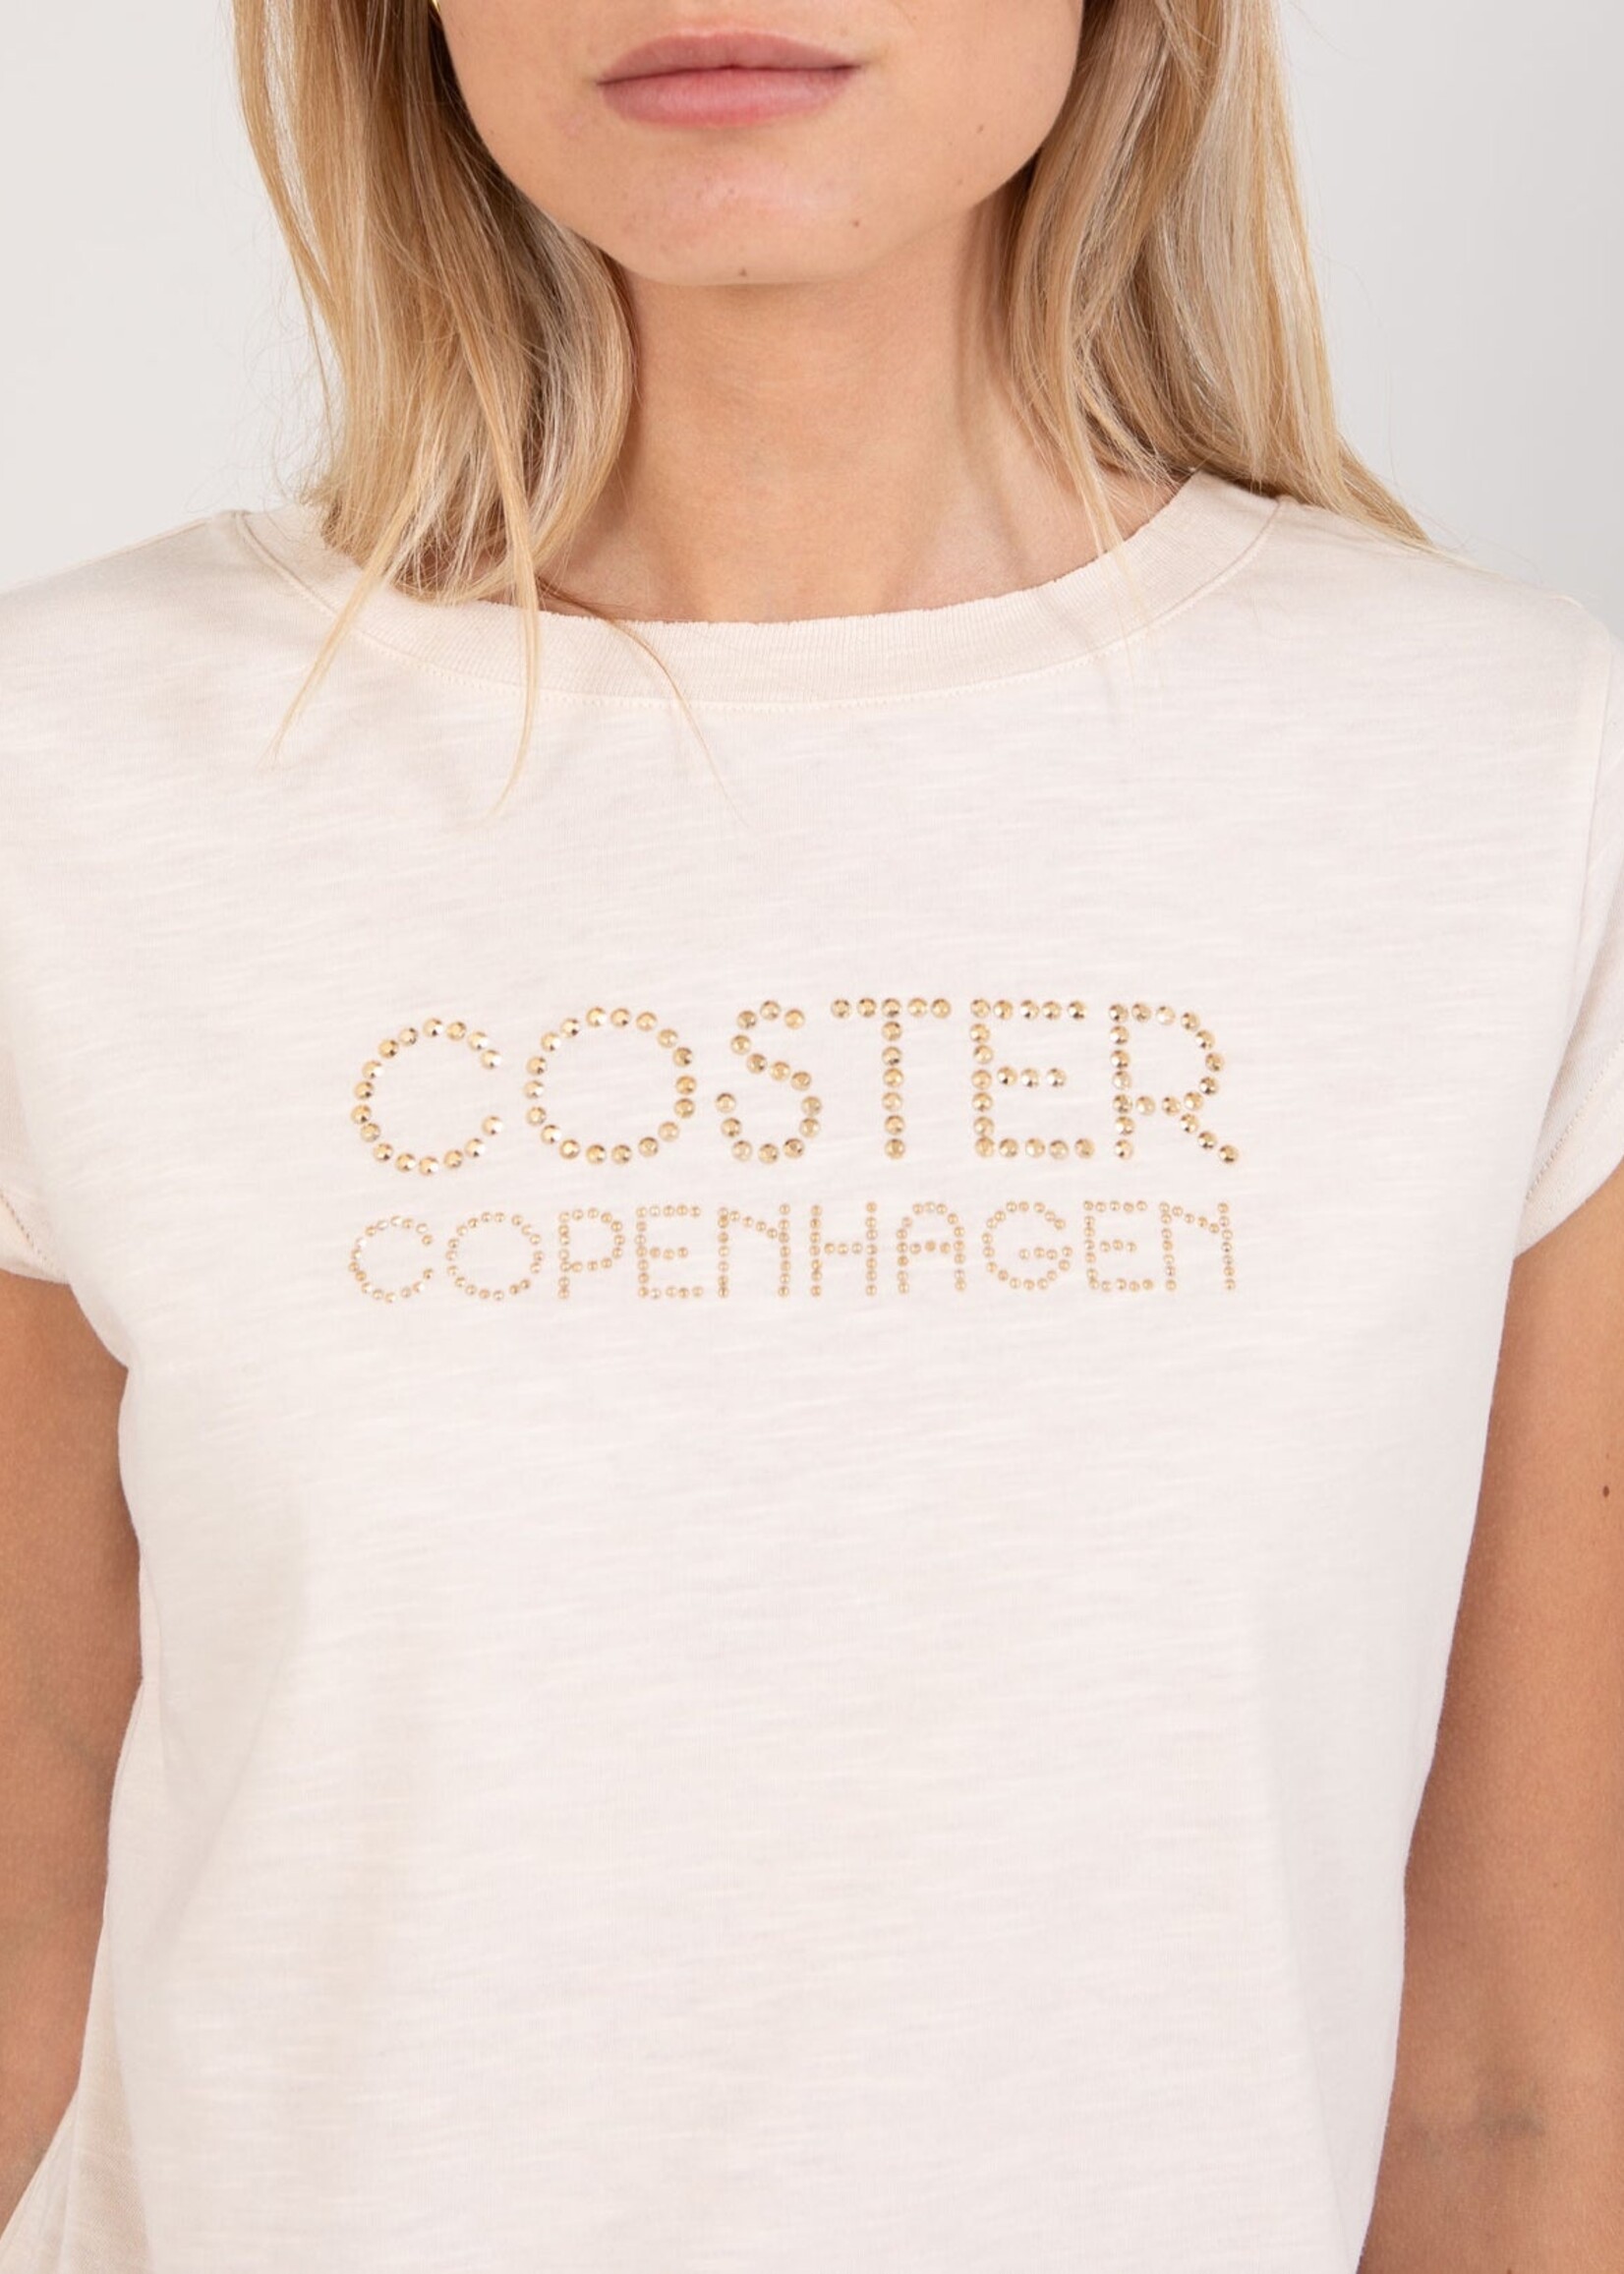 COSTER T-shirt Coster Logo